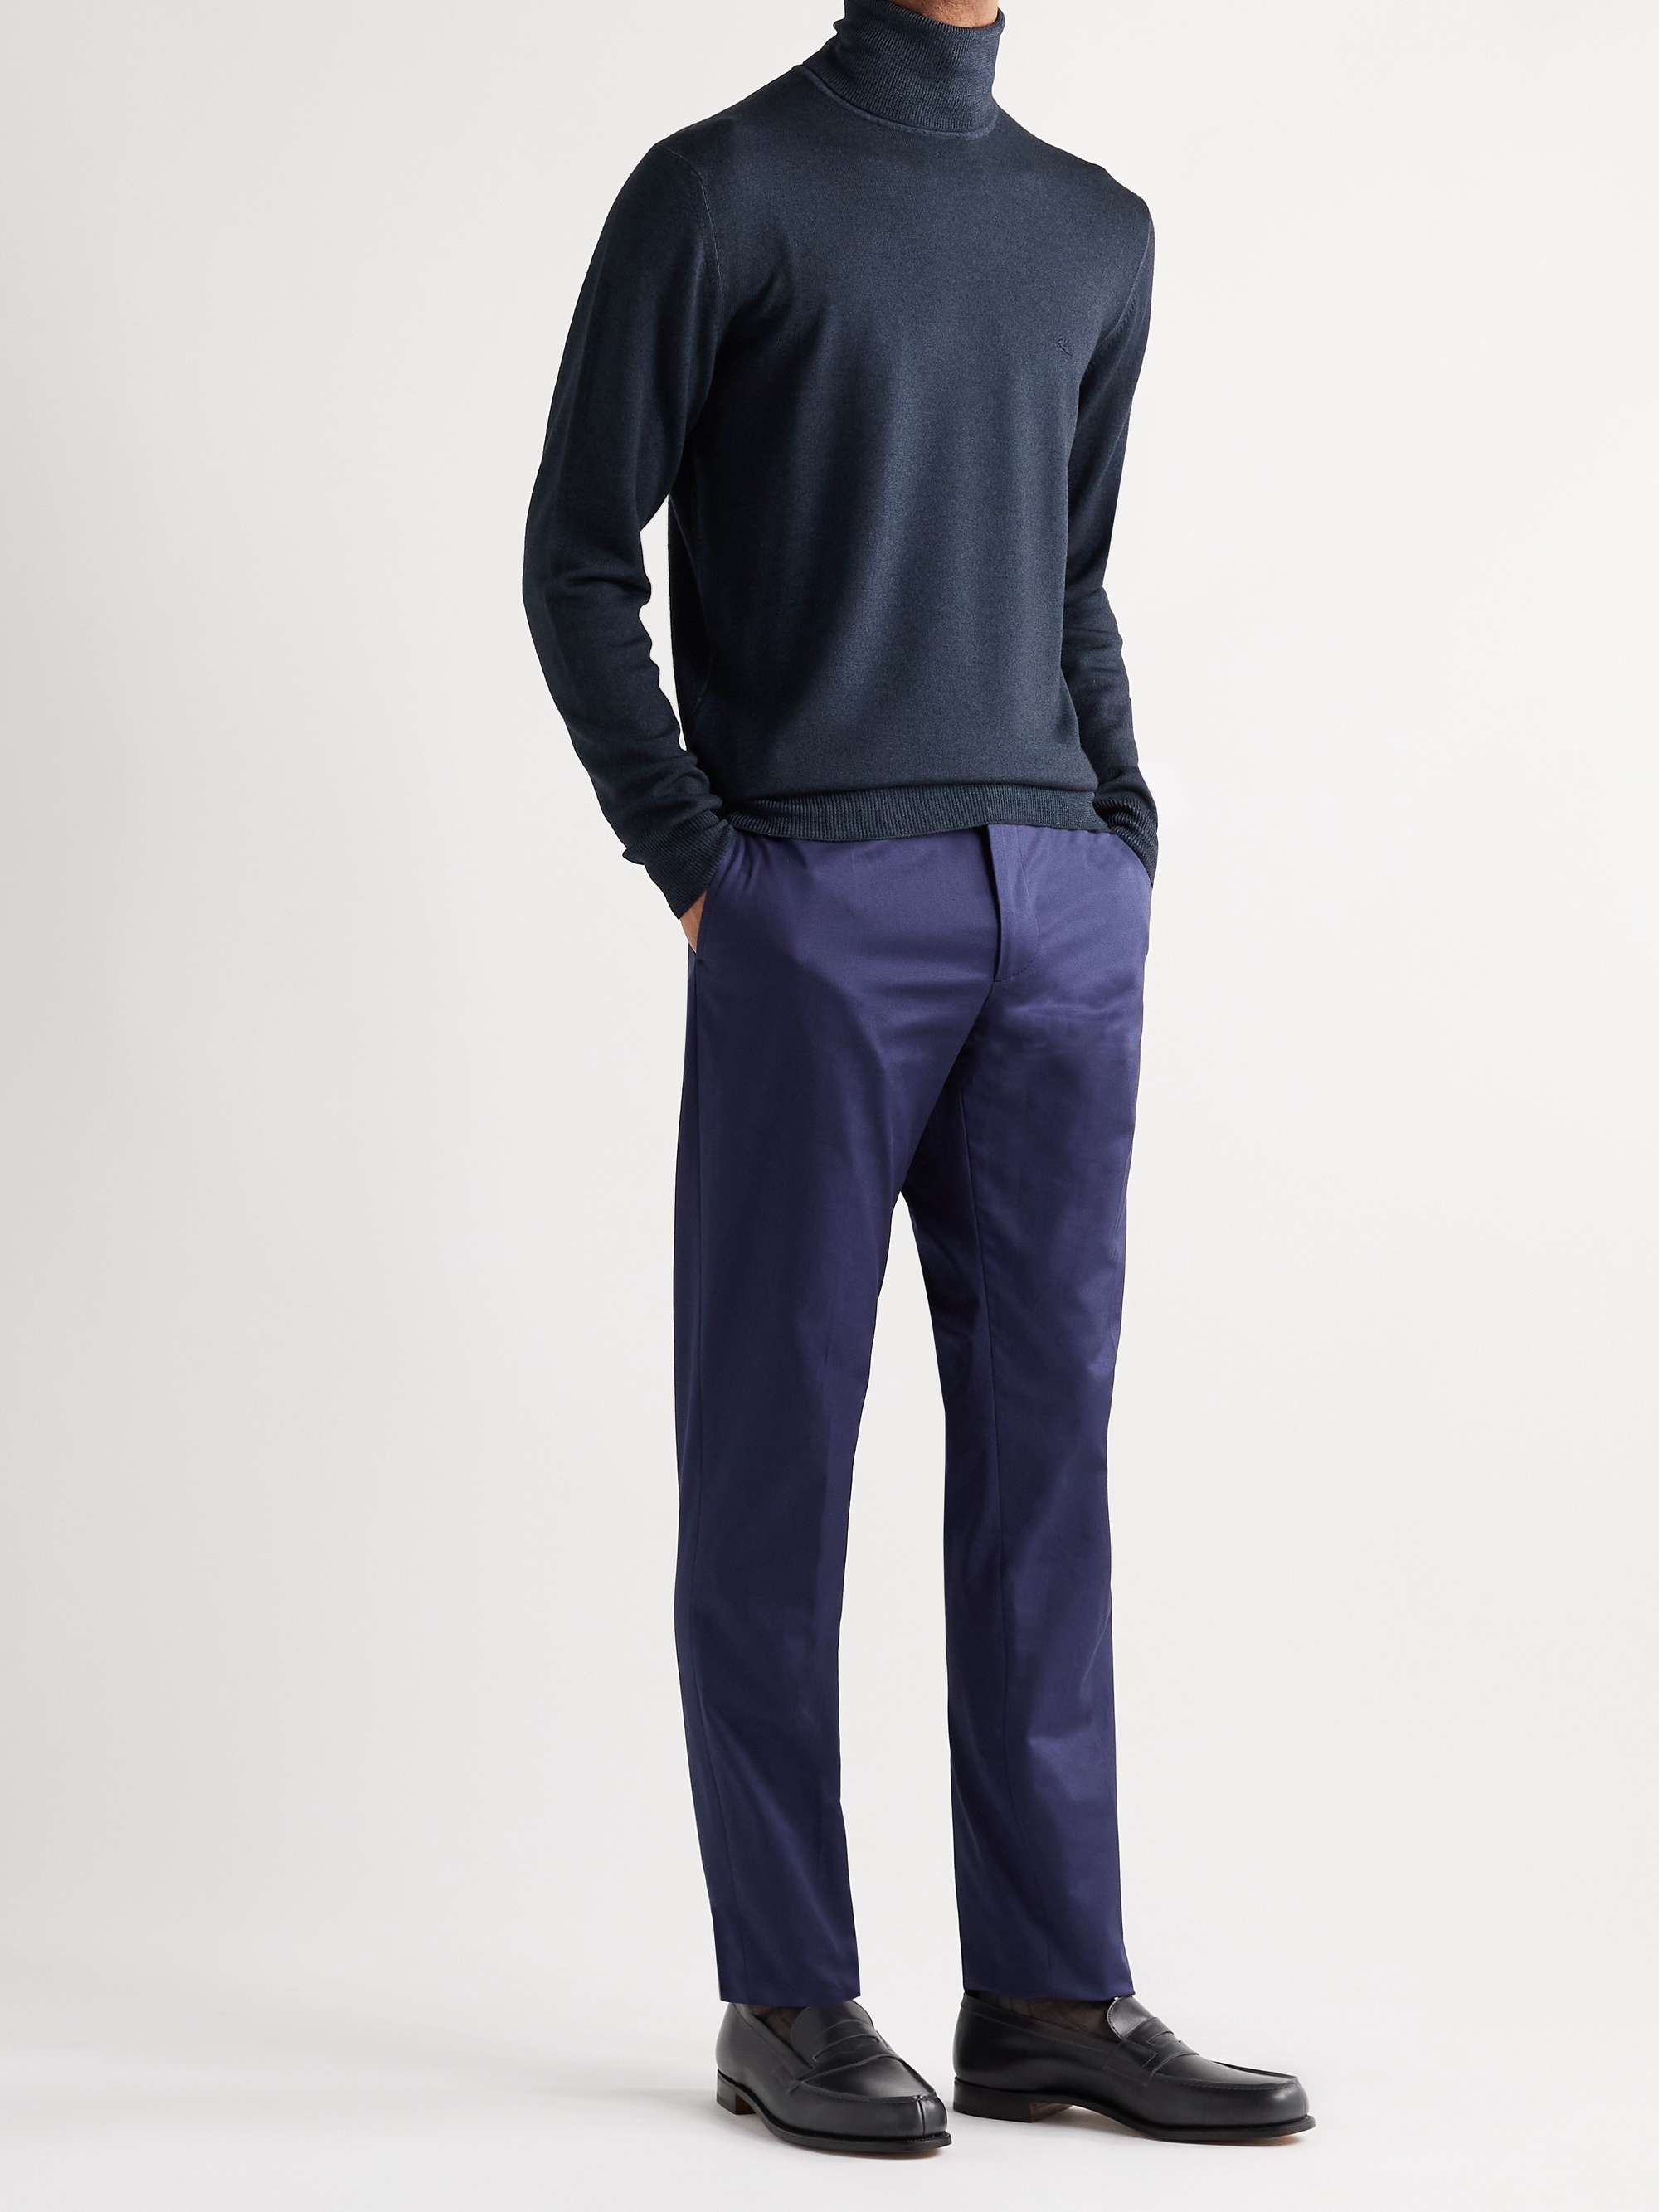 ETRO Logo-Embroidered Virgin Wool Rollneck Sweater